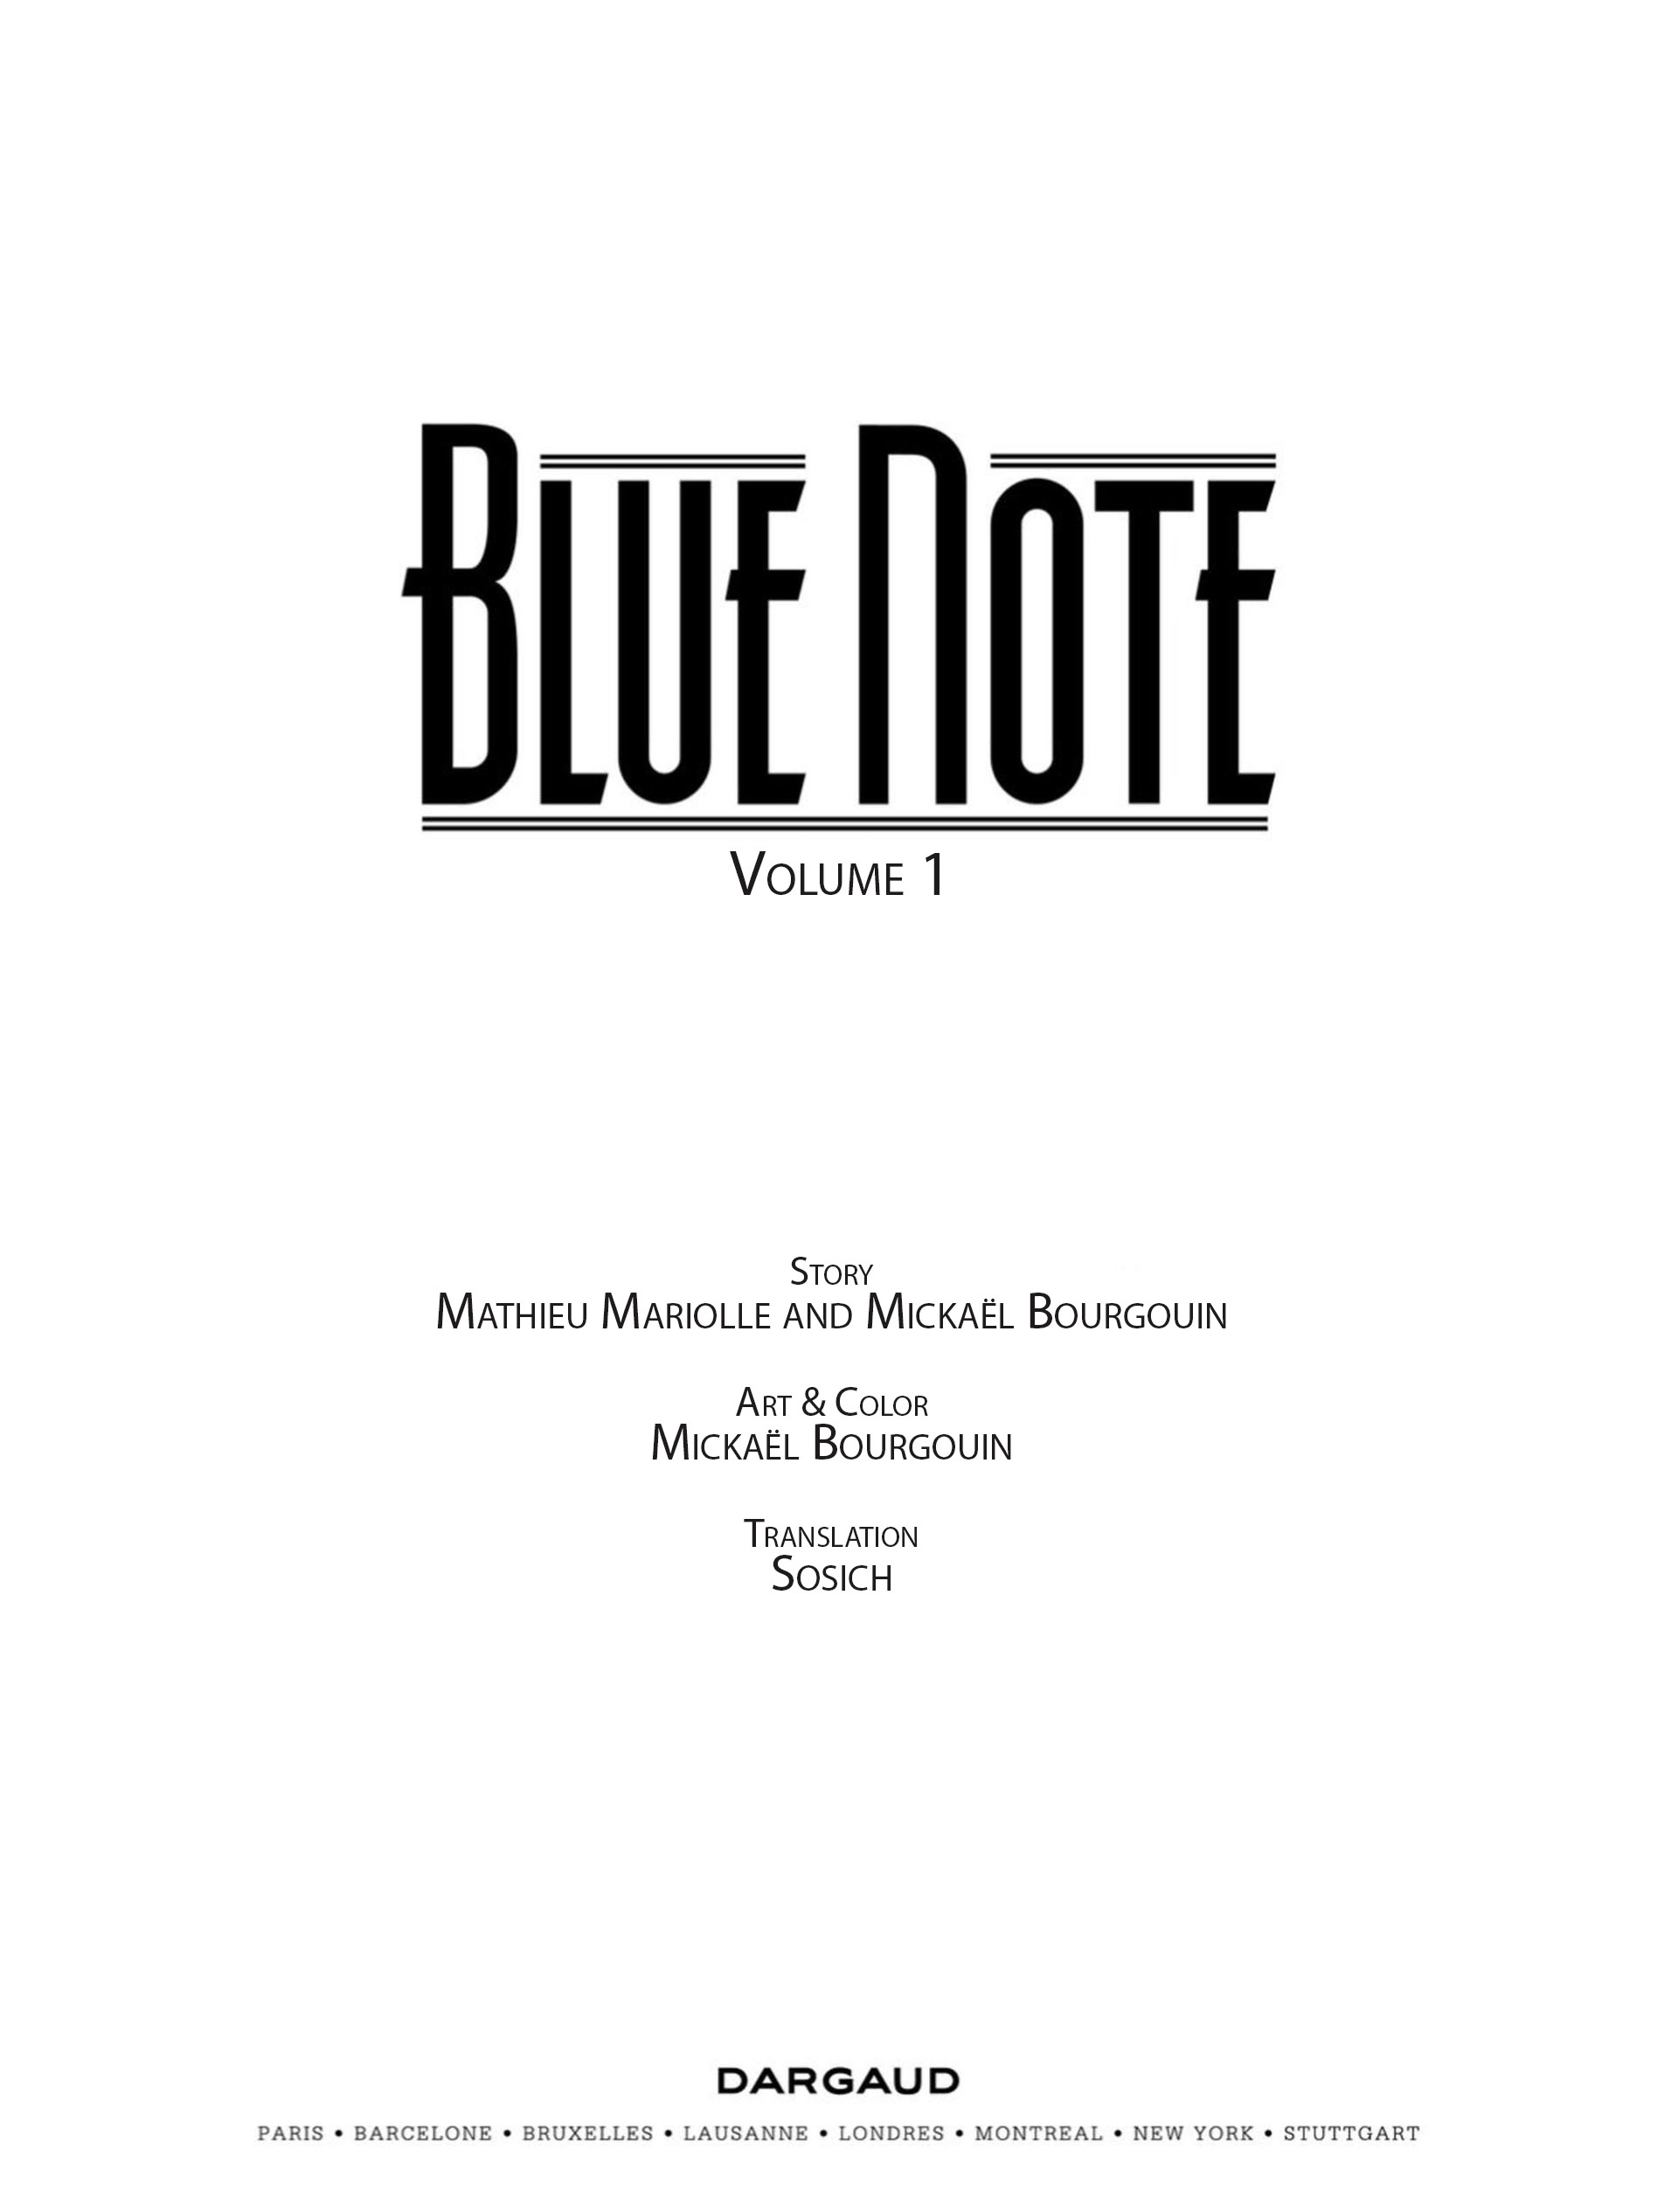 Read online Blue Note comic -  Issue #1 - 2